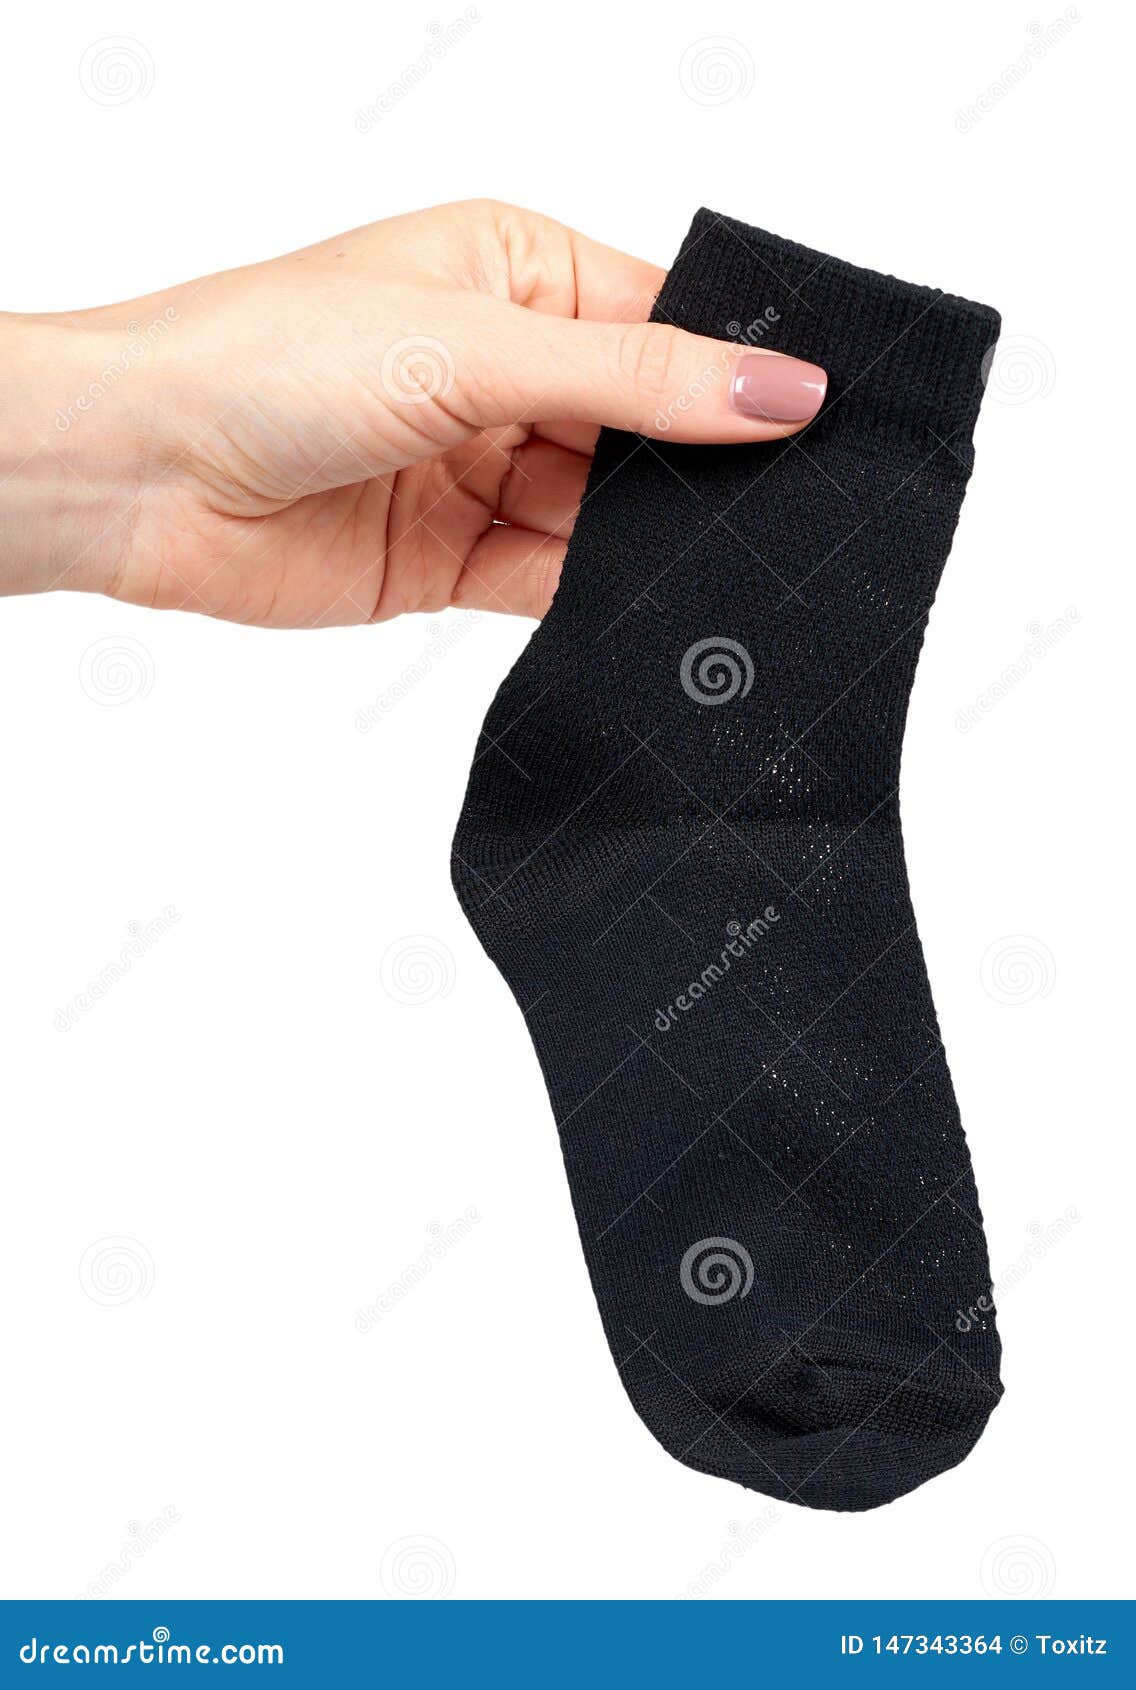 Hand with Black Cotton Sock, Foot Clothing Stock Photo - Image of ...